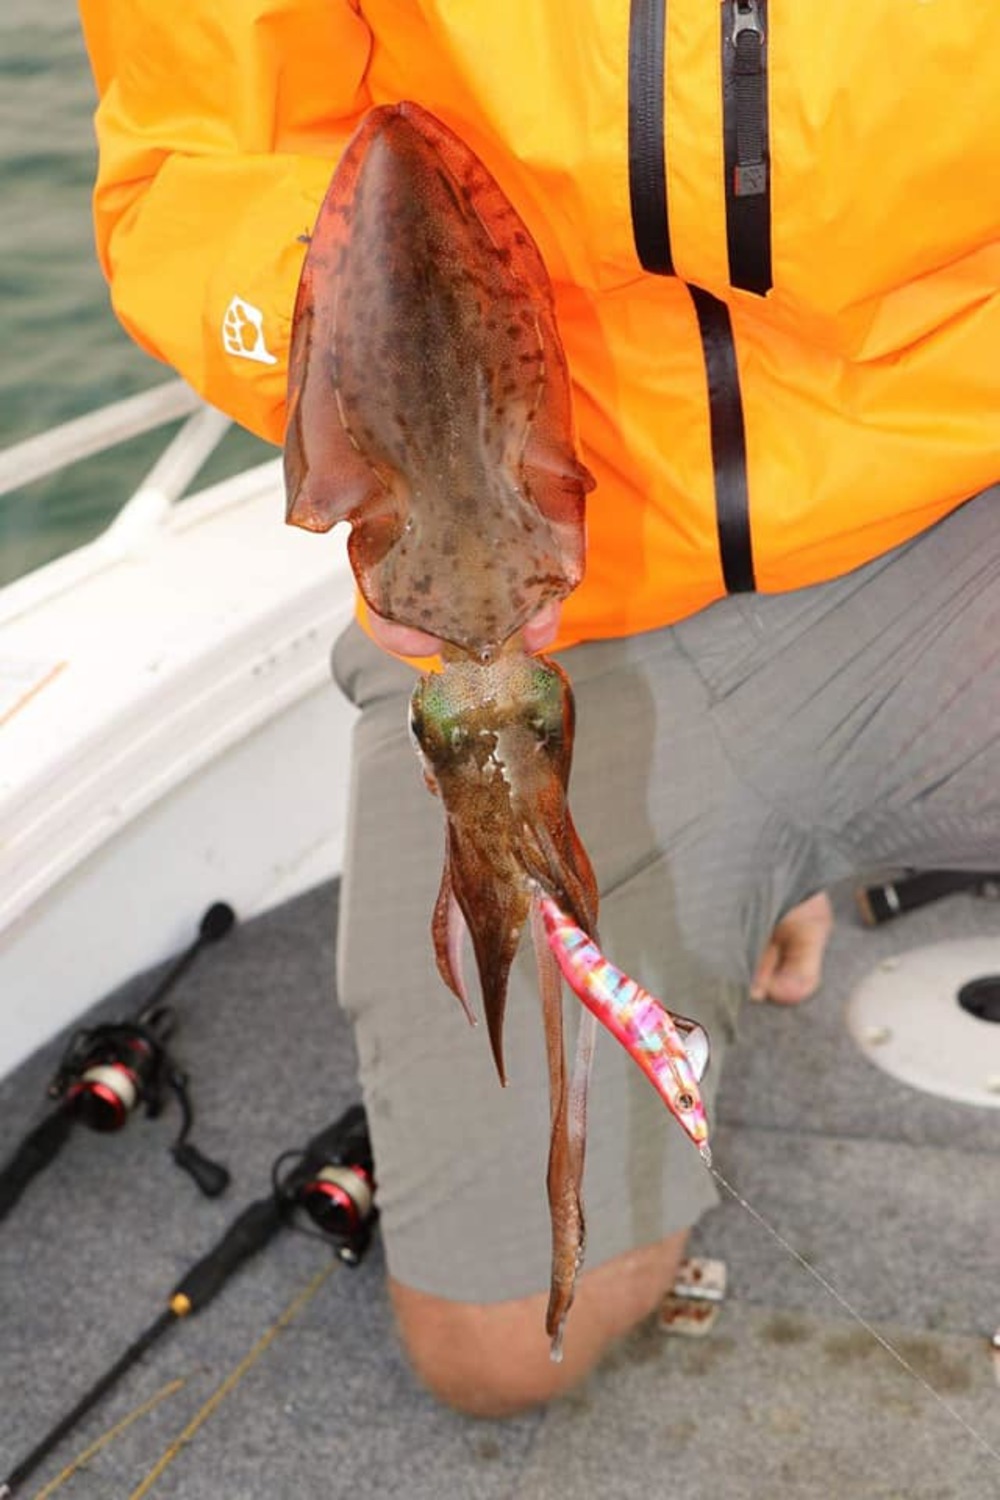 How to catch more squid? upgrade your squid jig! #fish #fishing #fishi